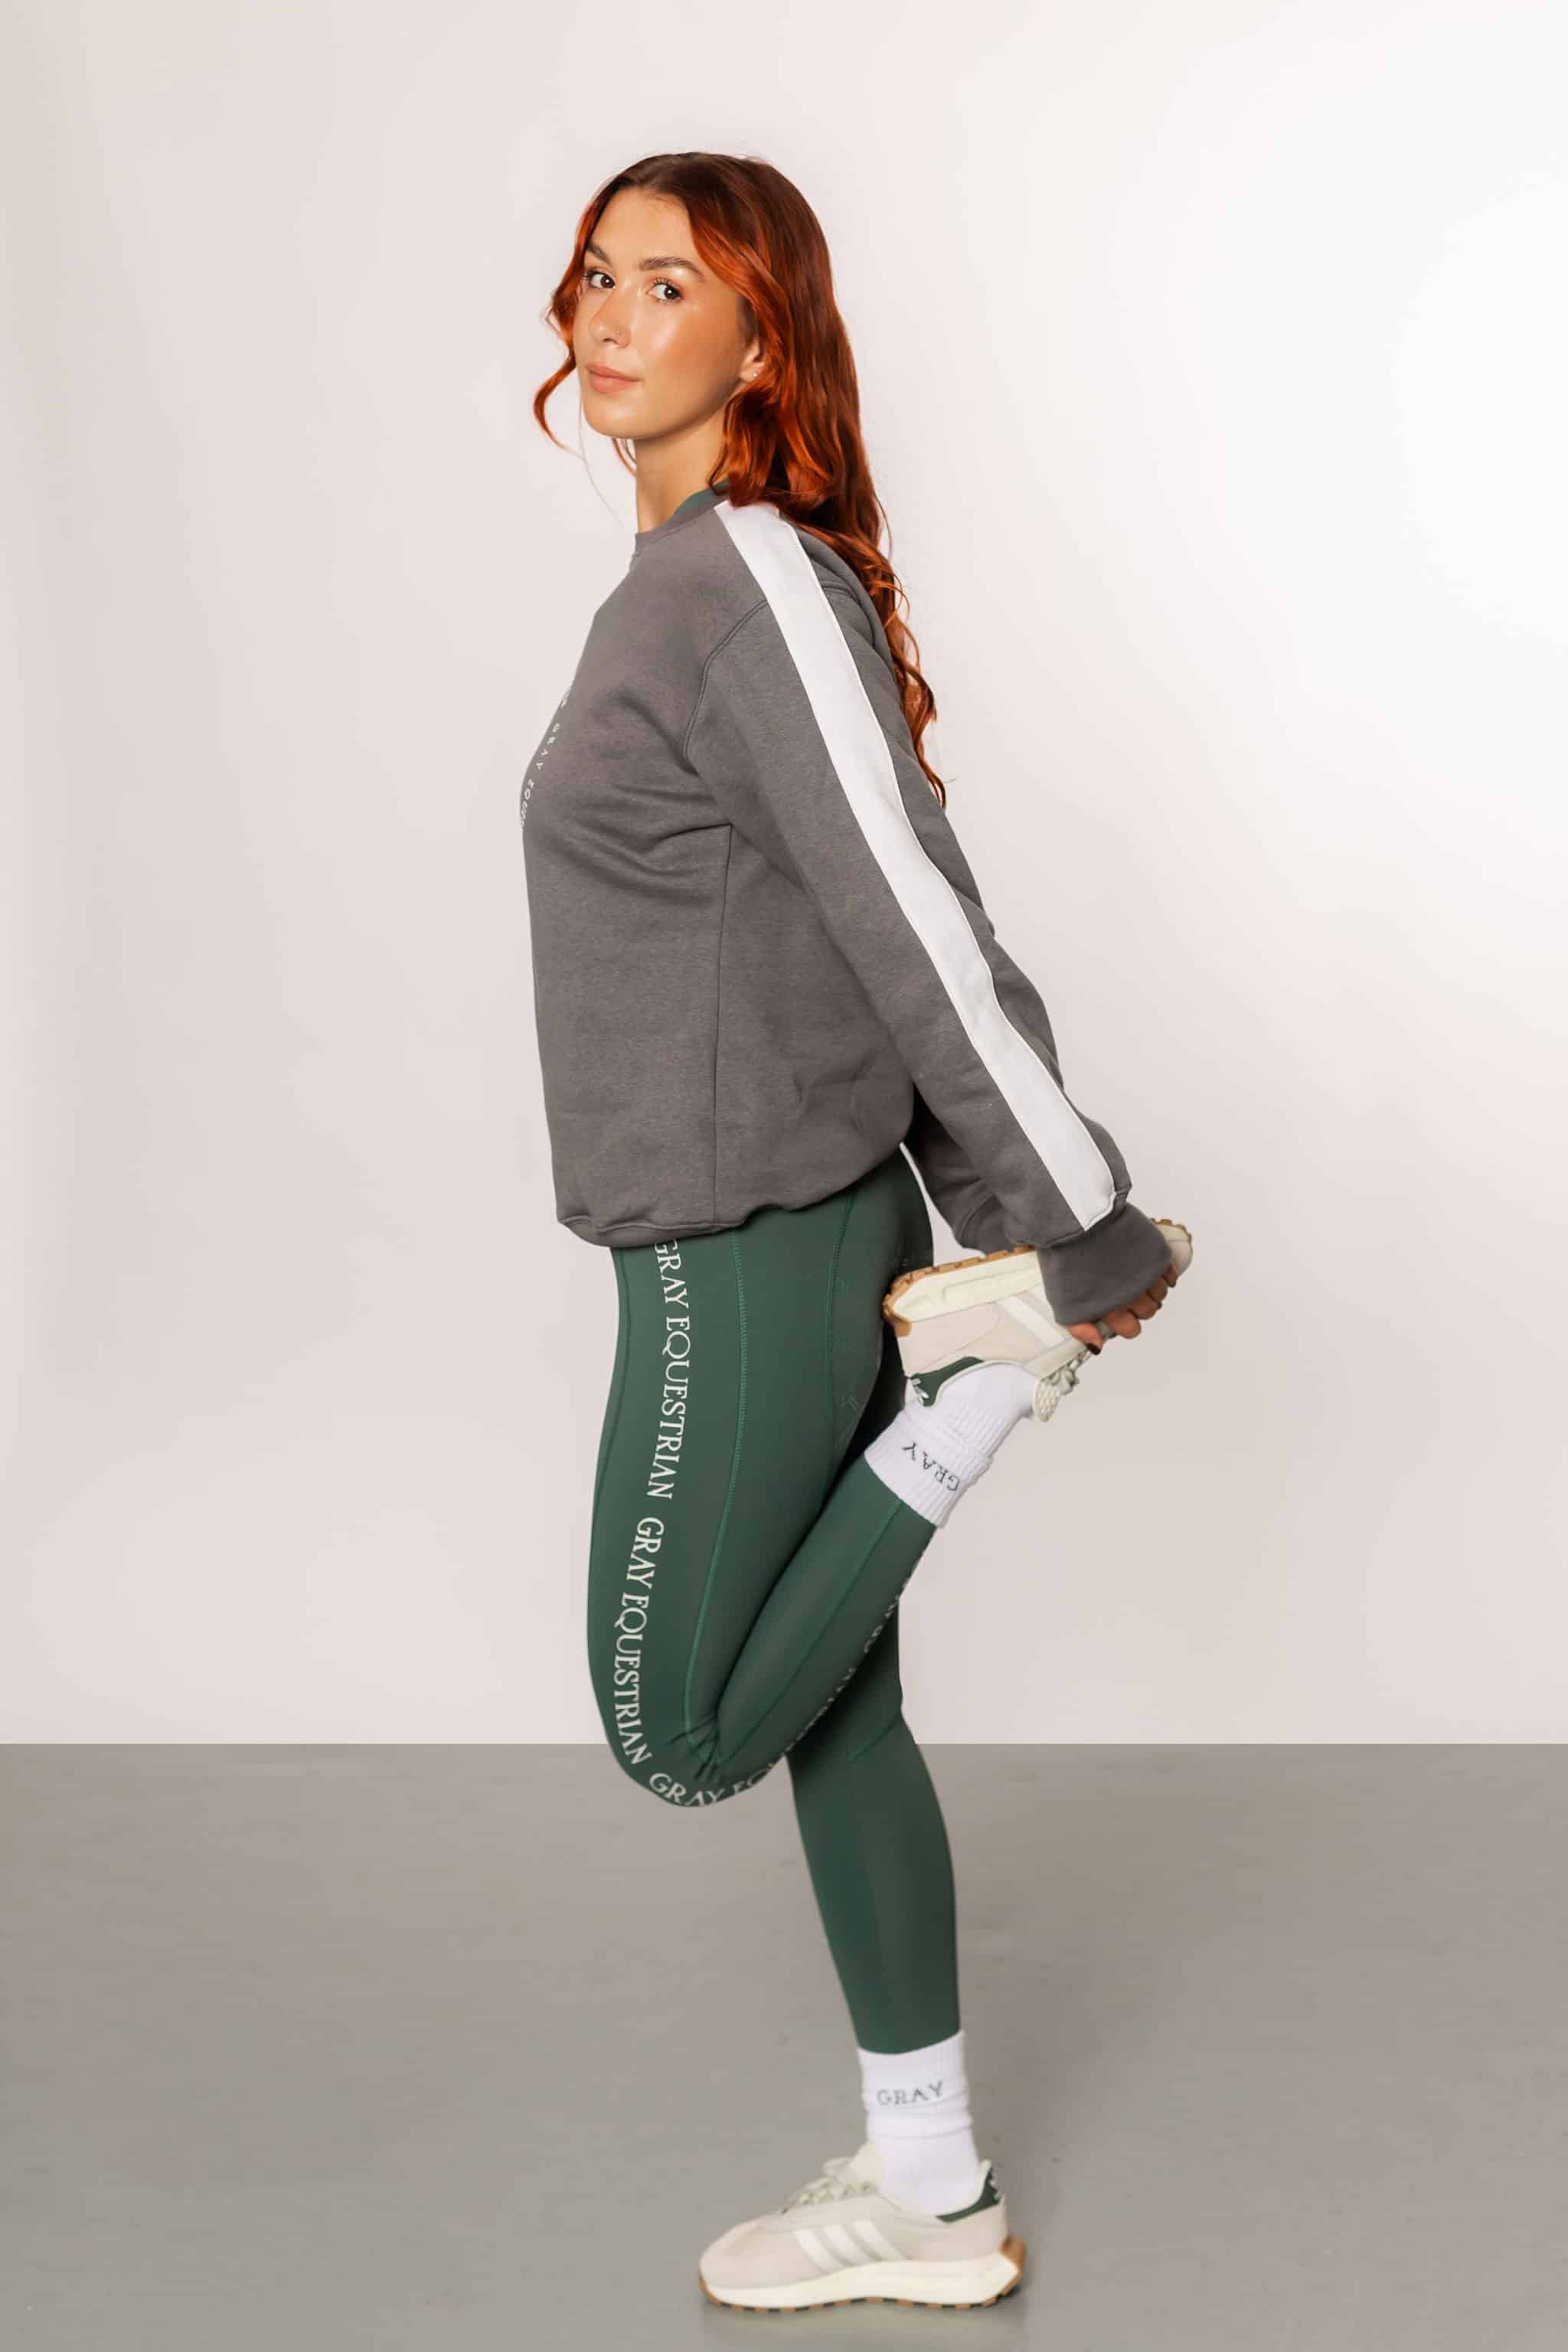 A view of the side of our grey sweatshirt with a white strip down the sleeves. The model is also wearing our green riding leggings.